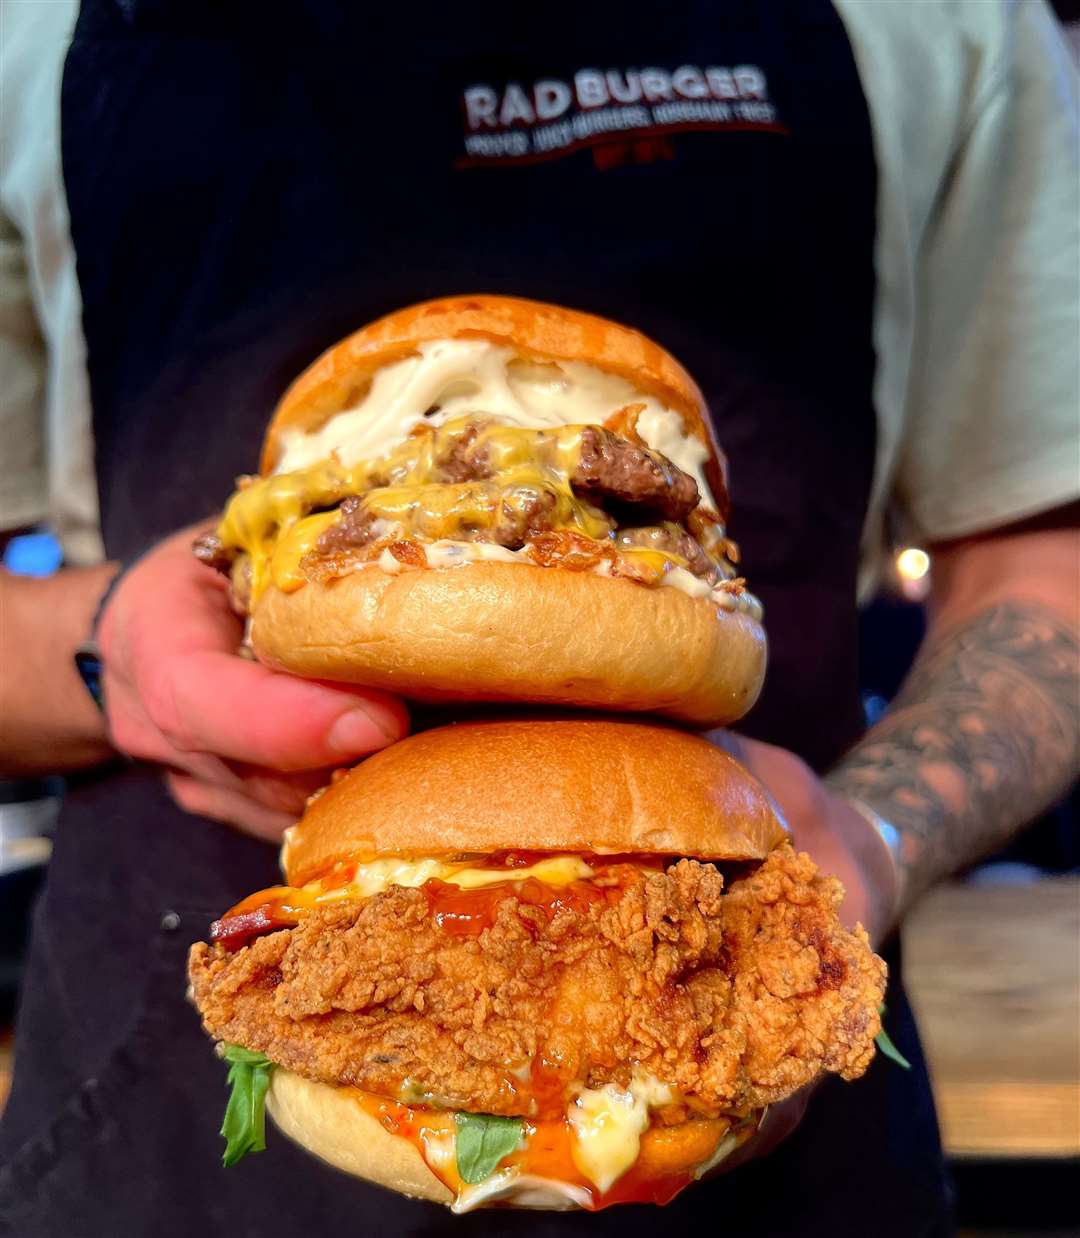 Whitstable-based RAD Burger is opening a new location at Folkestone Harbour Arm. Picture: Folkestone Harbour and RAD Burger